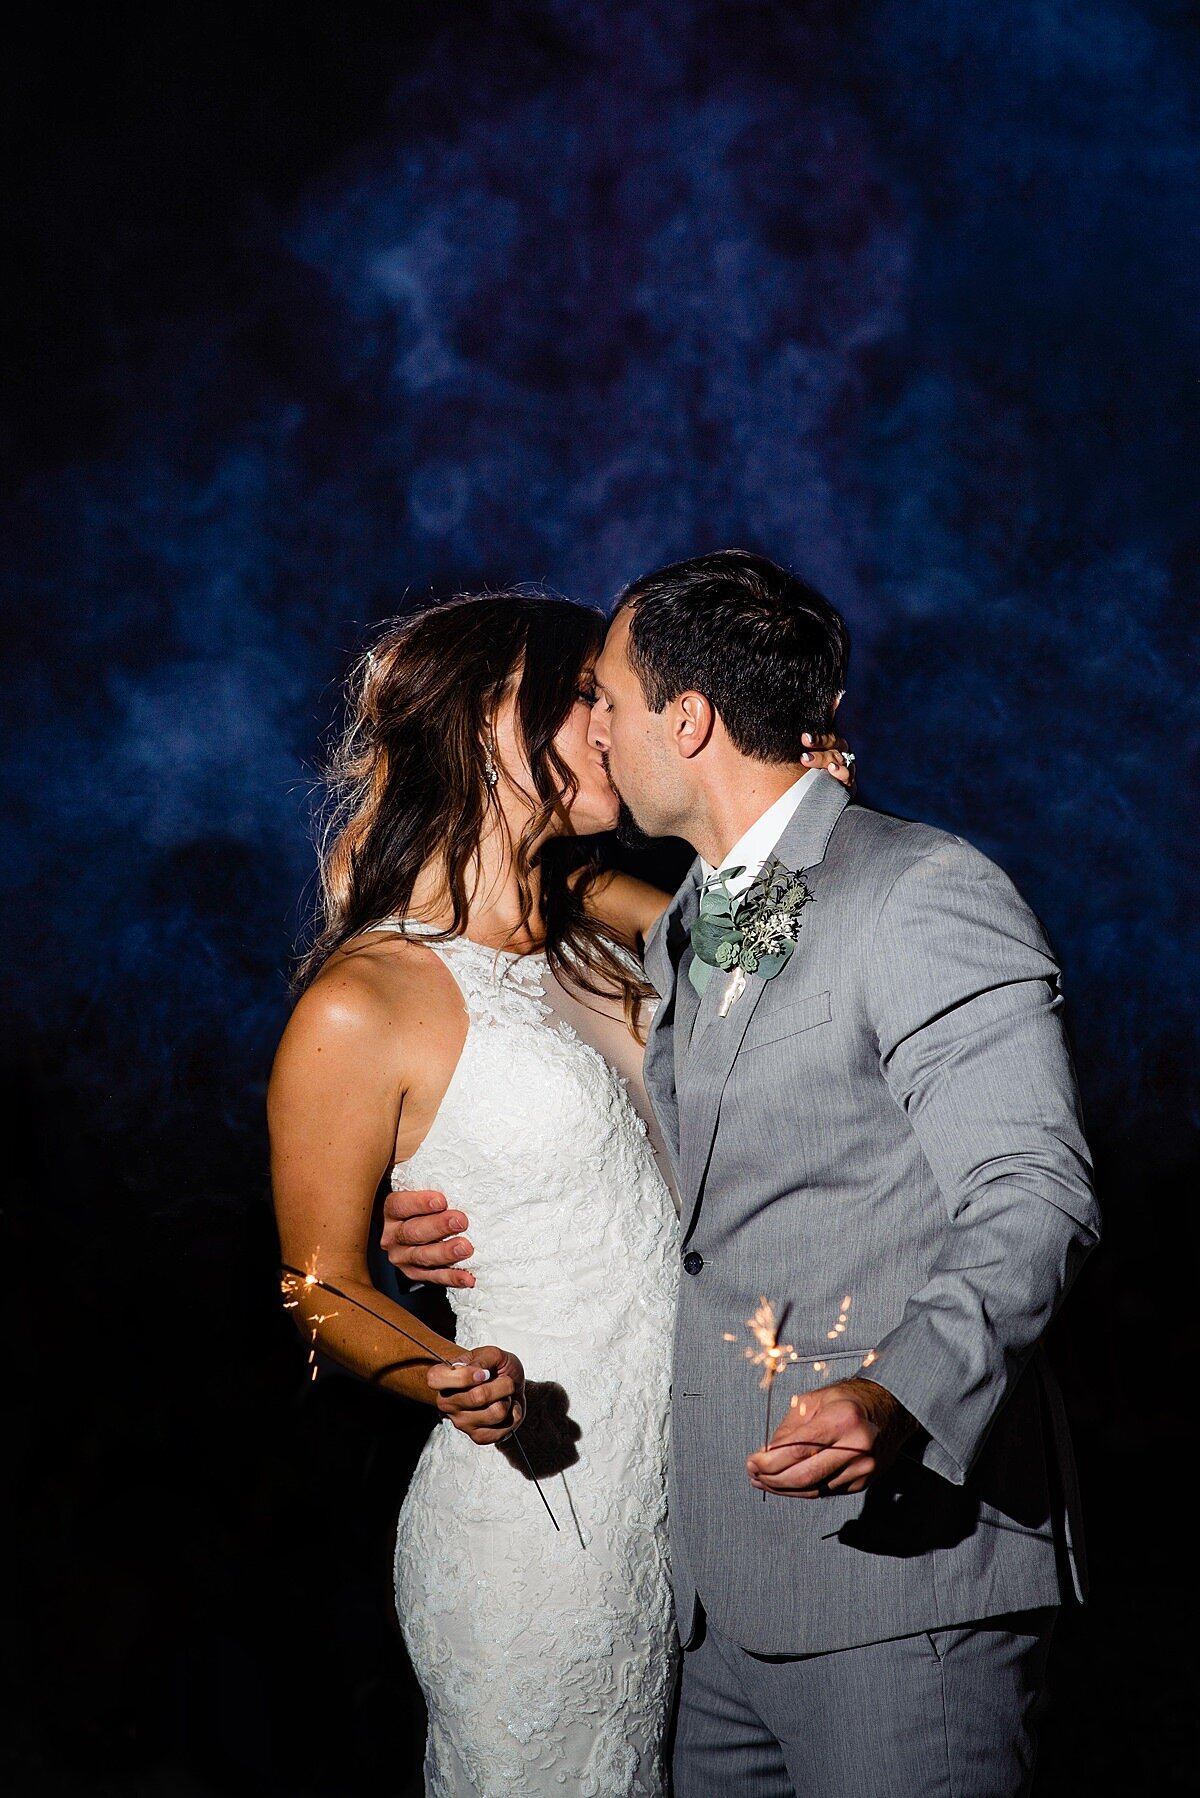 Bride and groom kissing while holding sparklers with smoke rising behind them